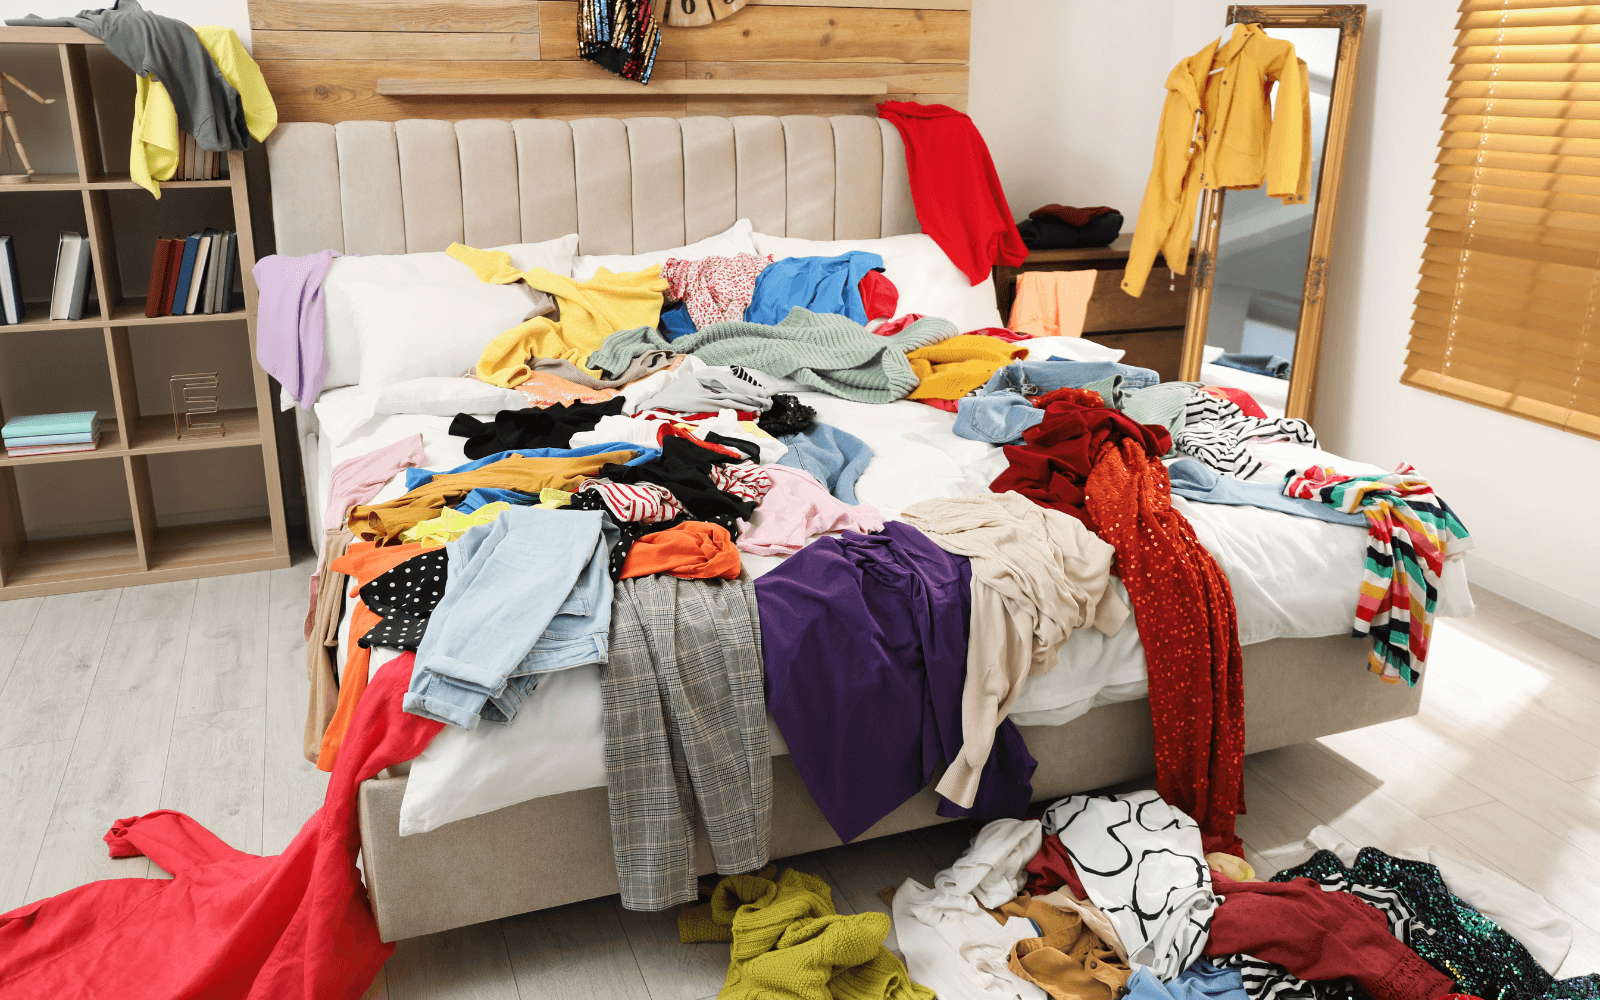 Sustainable Fashion. Avoid Fast fashion. A photo of lots of clothes thrown all over a bed.